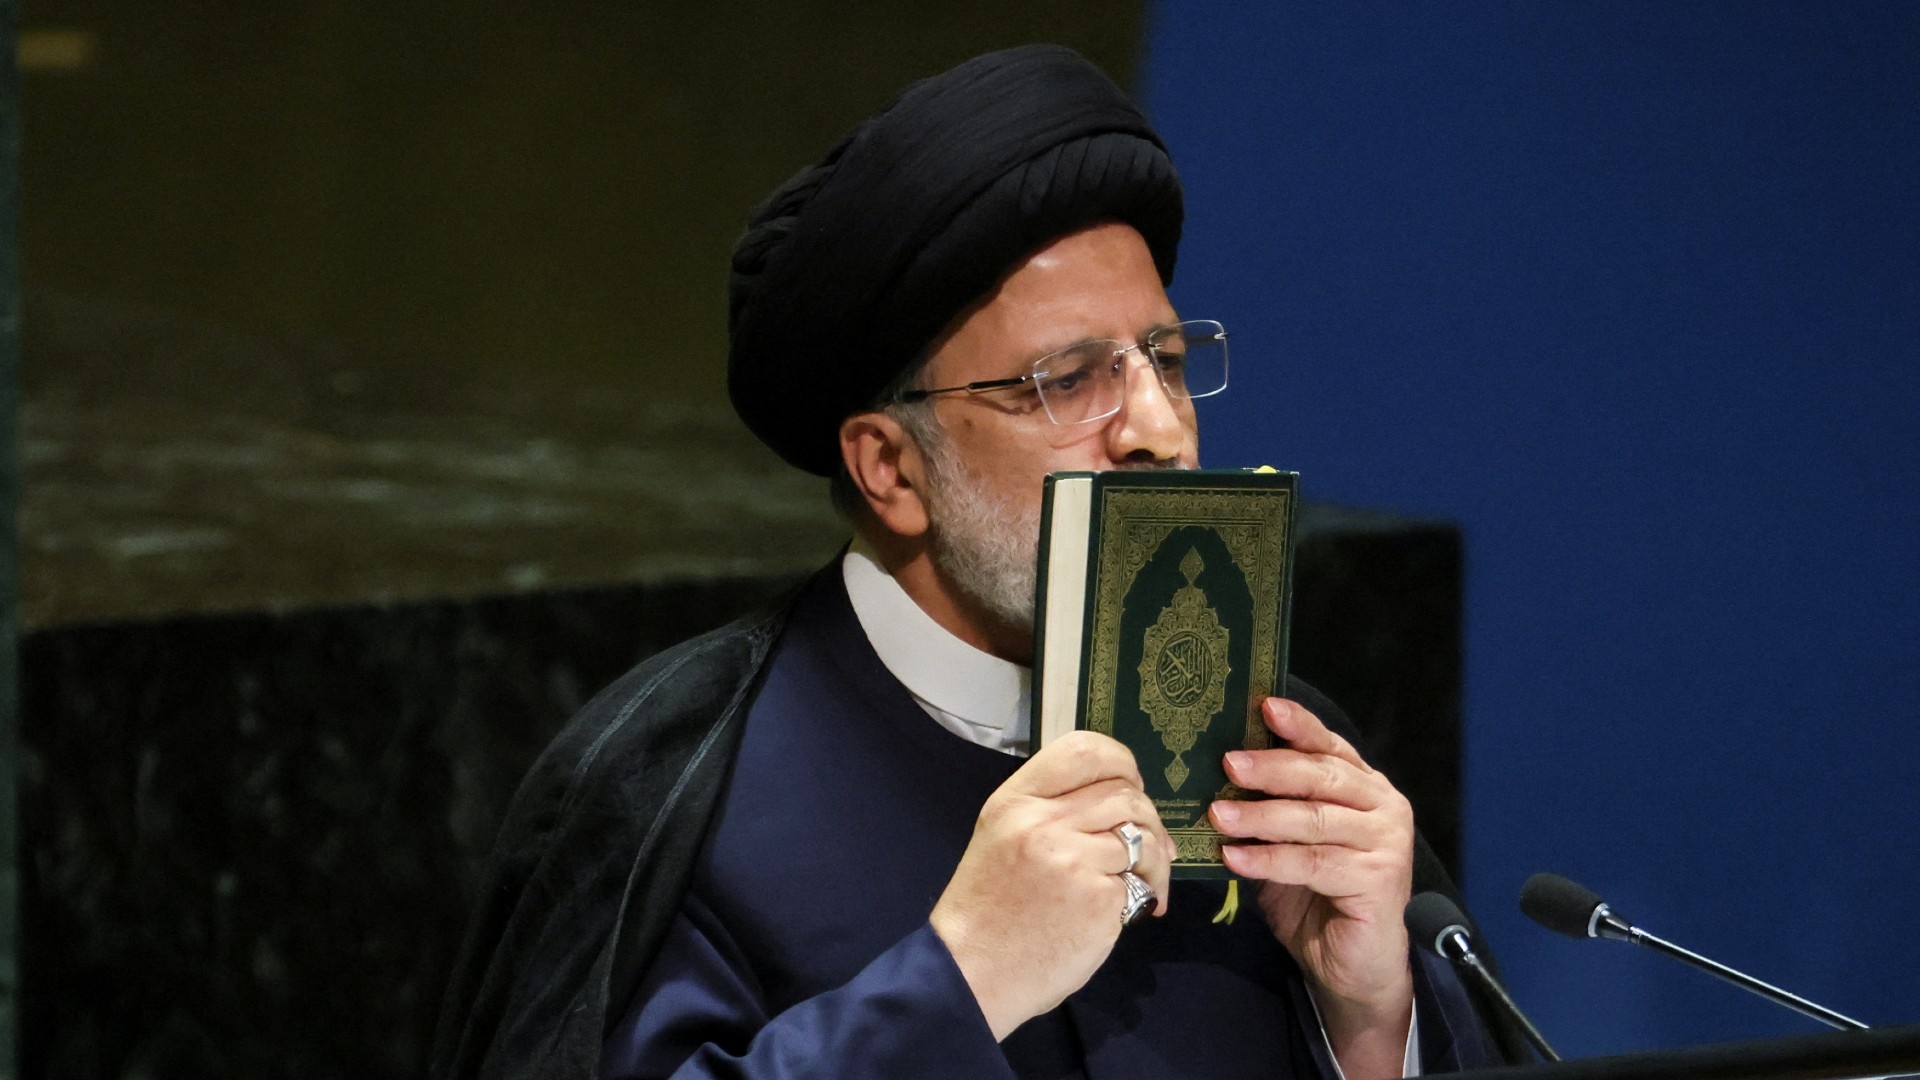 Iran's President Ebrahim Raisi kisses the Quran as he addresses the UN General Assembly in New York City, 19 September (Reuters)